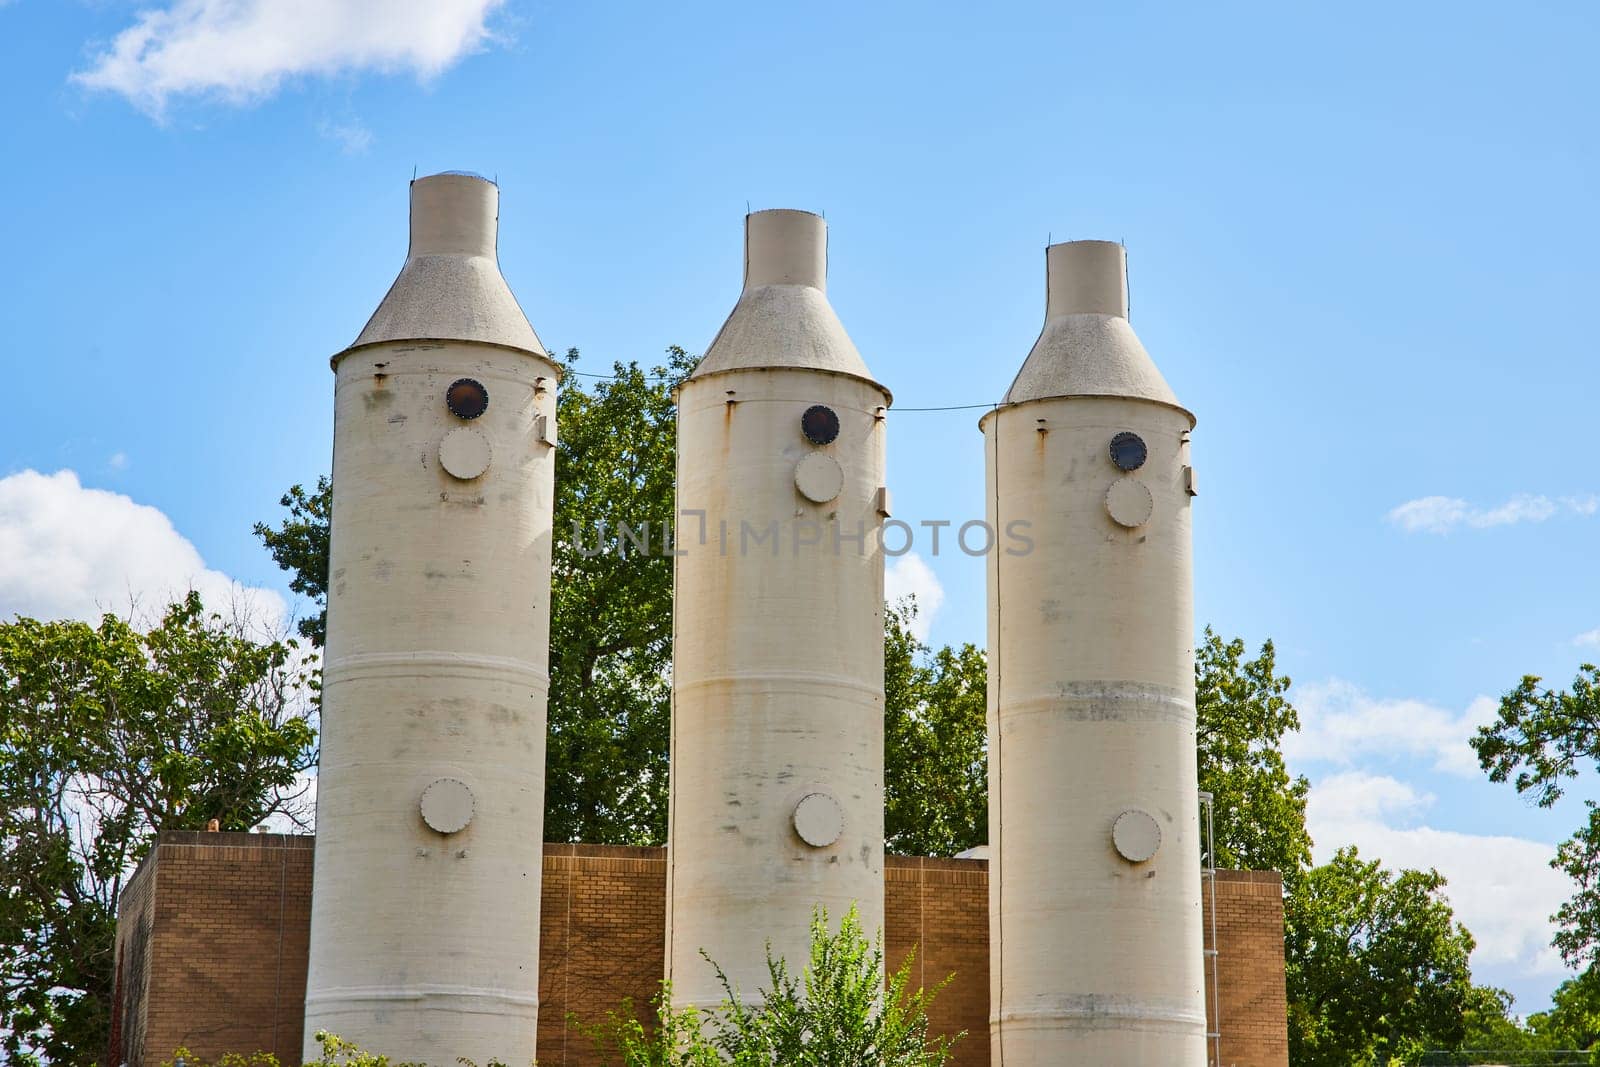 Imposing cream-colored industrial silos tower against a vibrant blue sky, enclosed within an industrial complex in Botanic Gardens, Elkhart, Indiana, depicting the harmony between industry and nature.